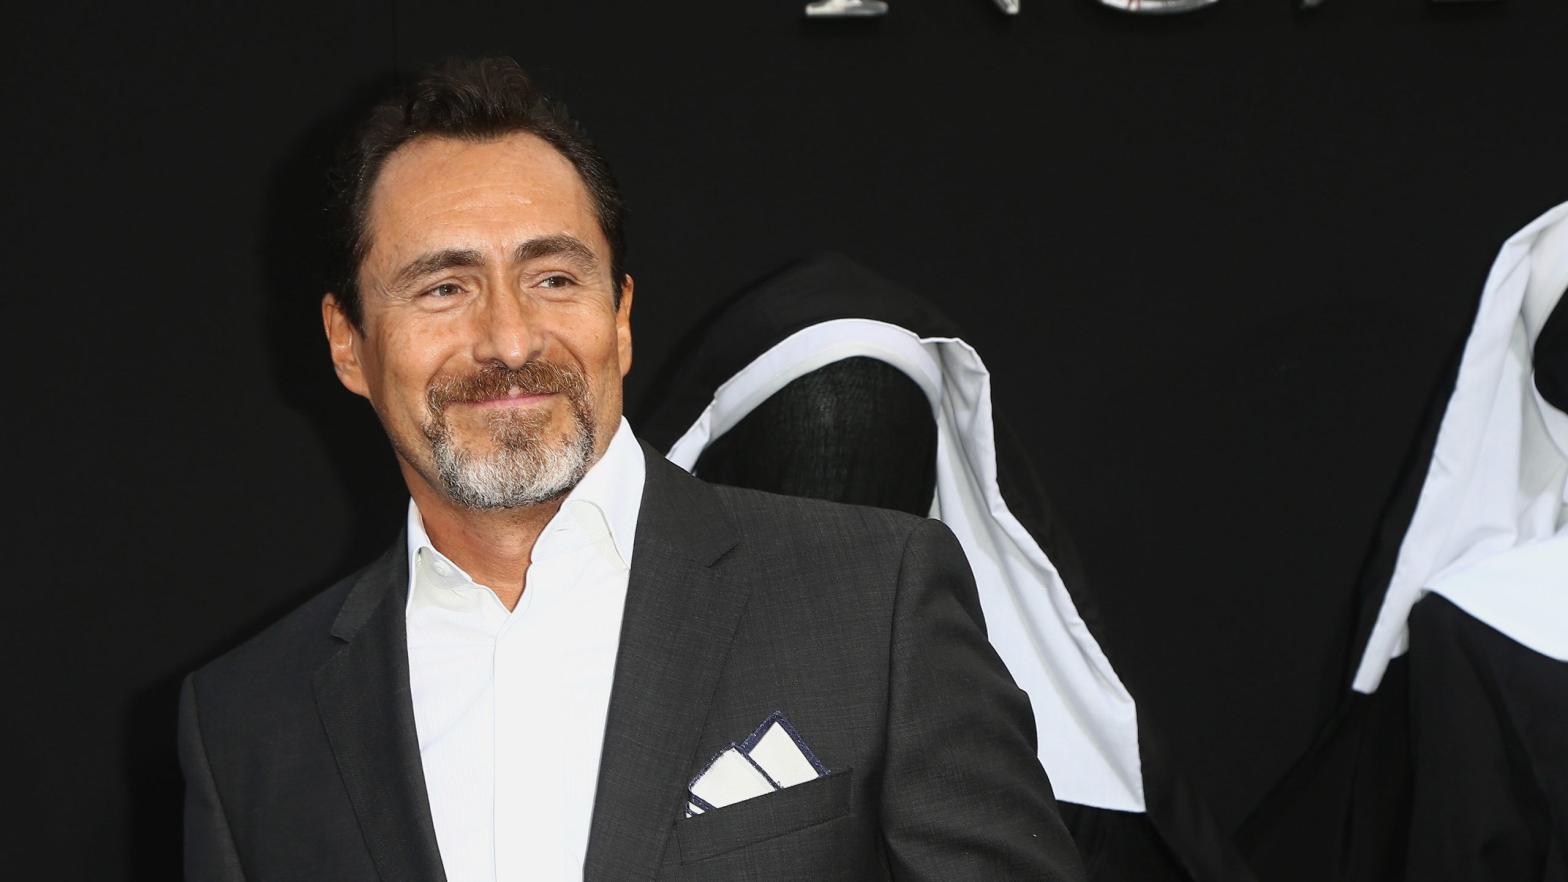 Demián Bichir attends the premiere of The Nun at TCL Chinese Theatre on September 4, 2018 in Hollywood, California. (Photo: Tommaso Boddi, Getty Images)